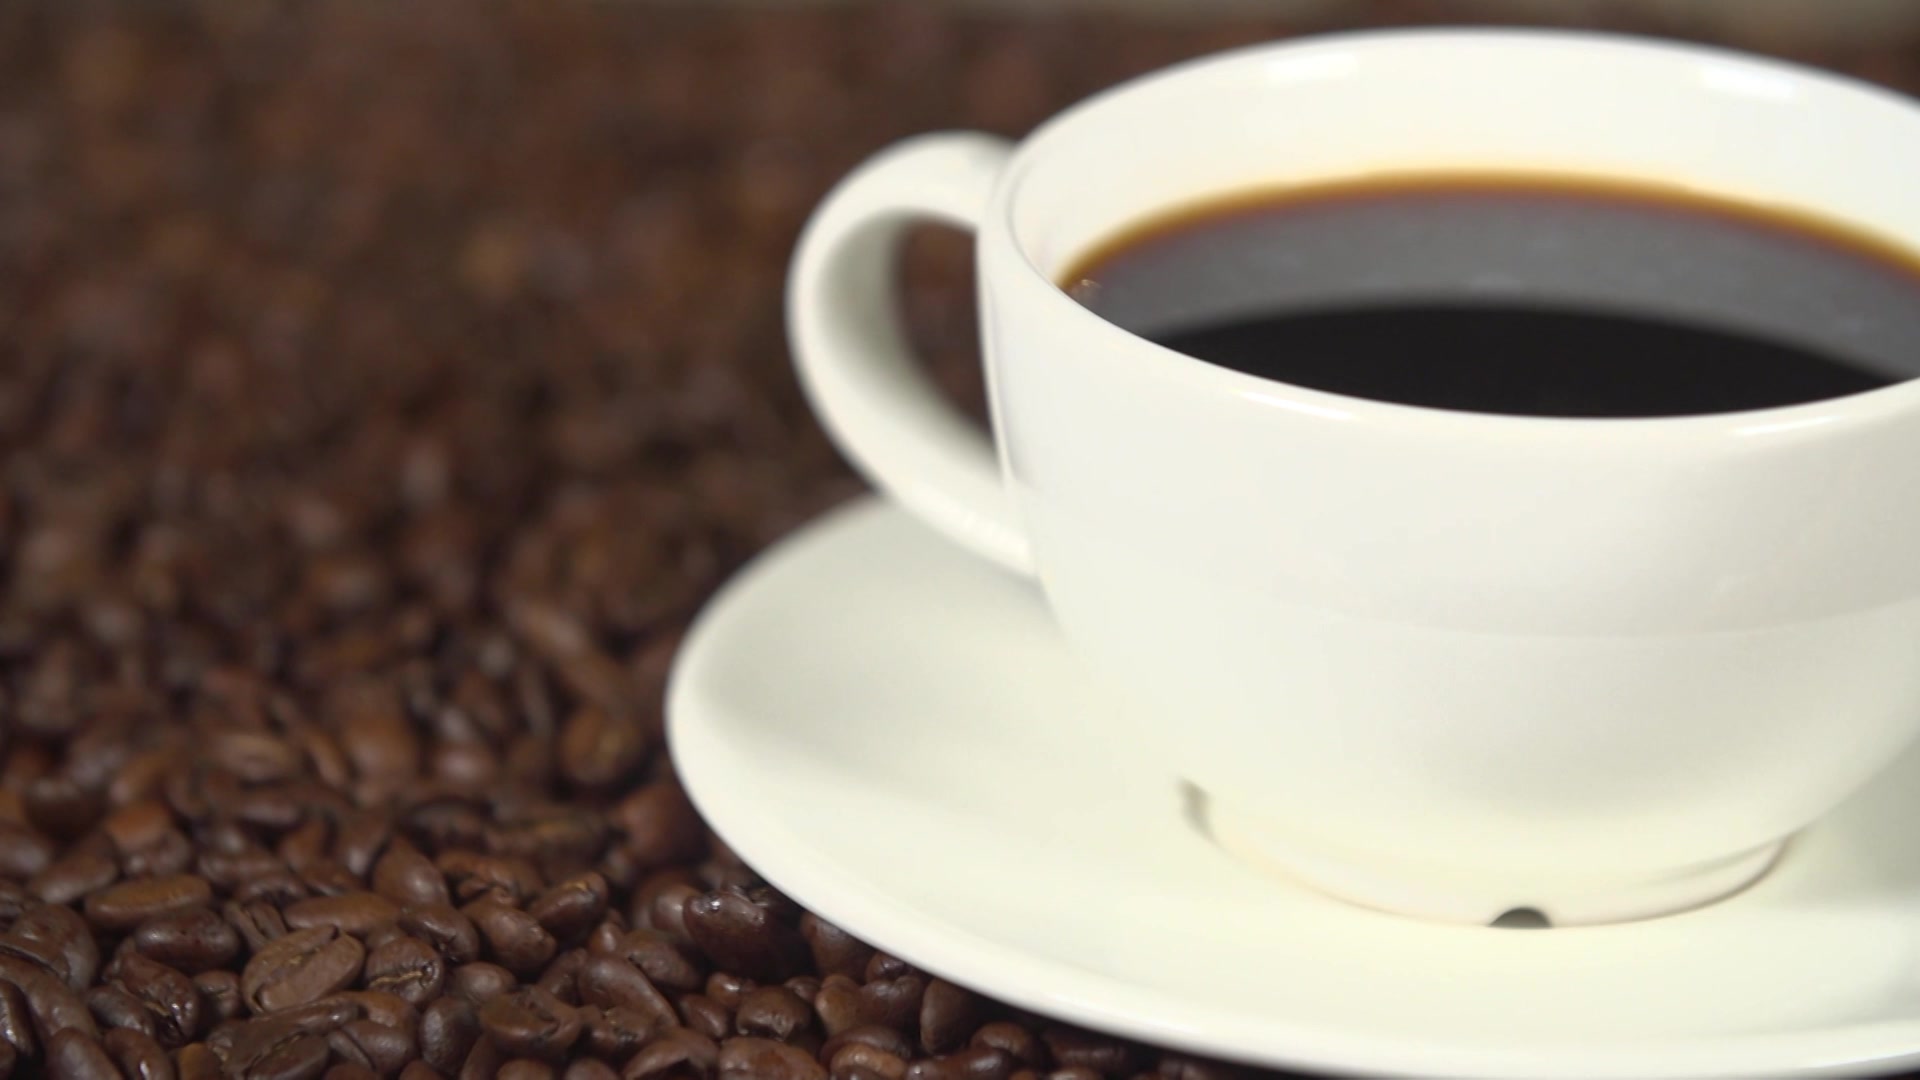 Coffee may require cancer warning label - CNN Video